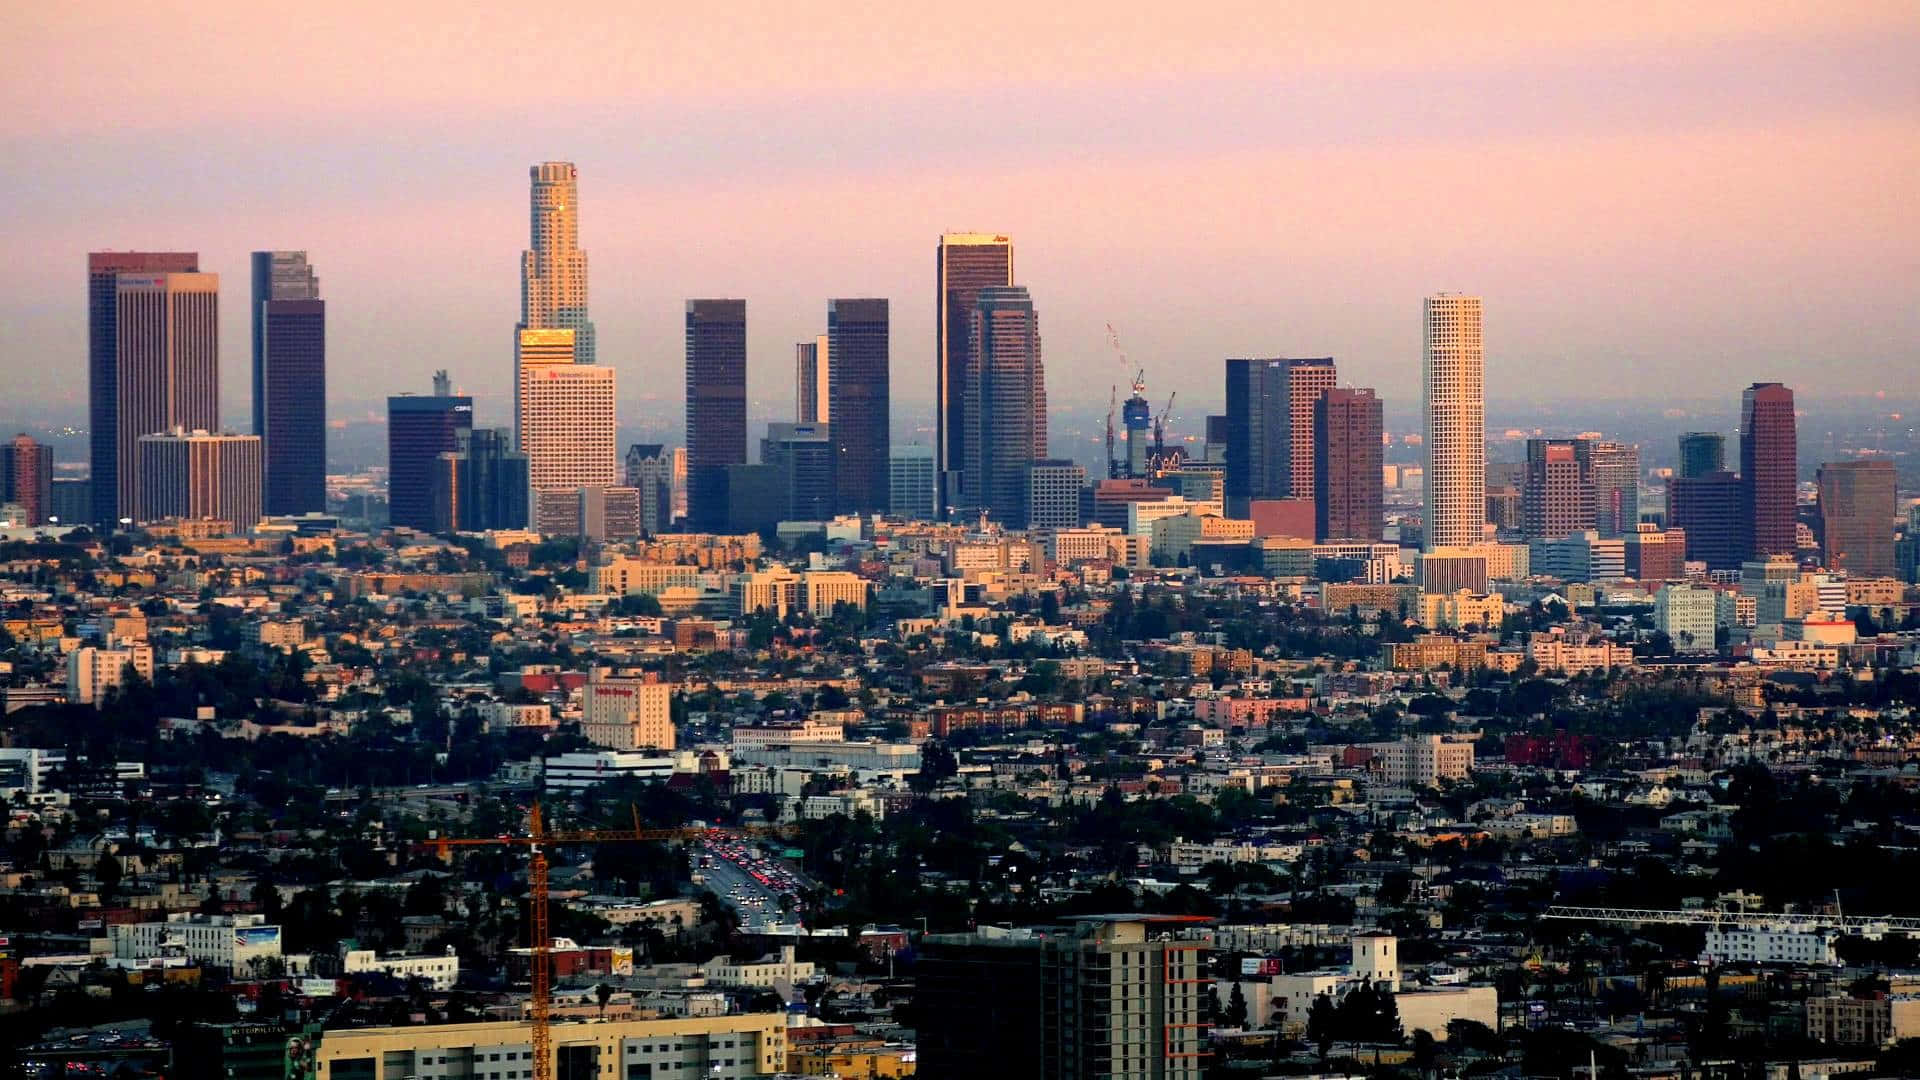 Stunning view of the Los Angeles skyline at sunset